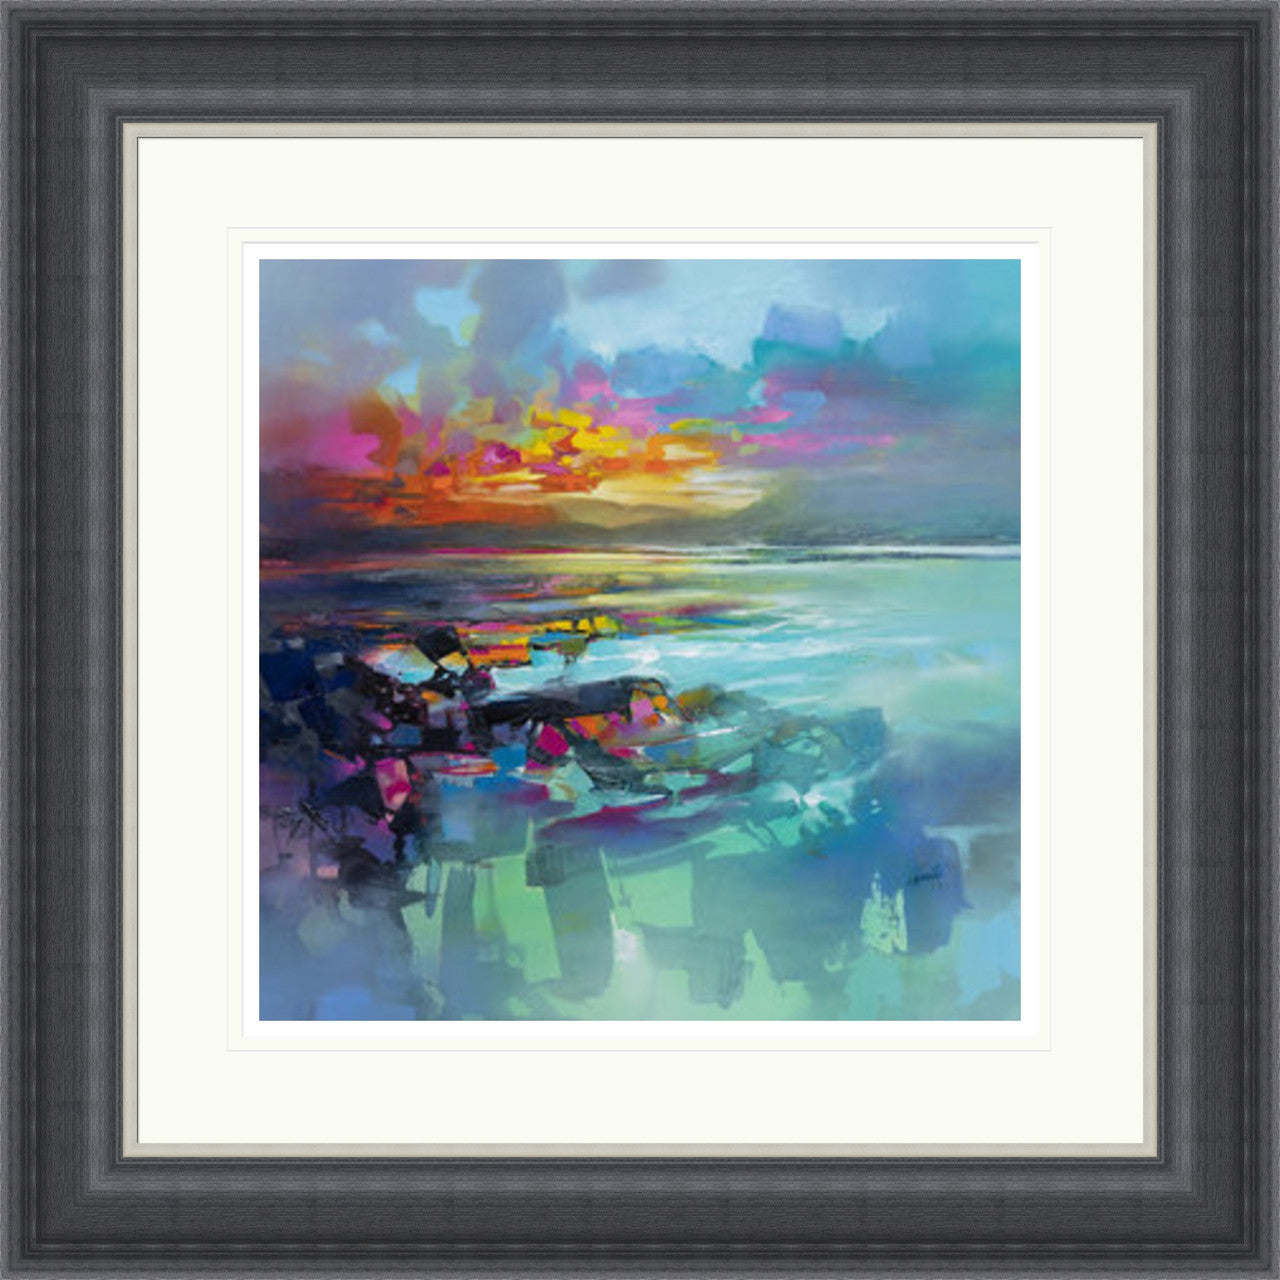 Approaching Arran (Signed & Numbered Limited Edition) by Scott Naismith